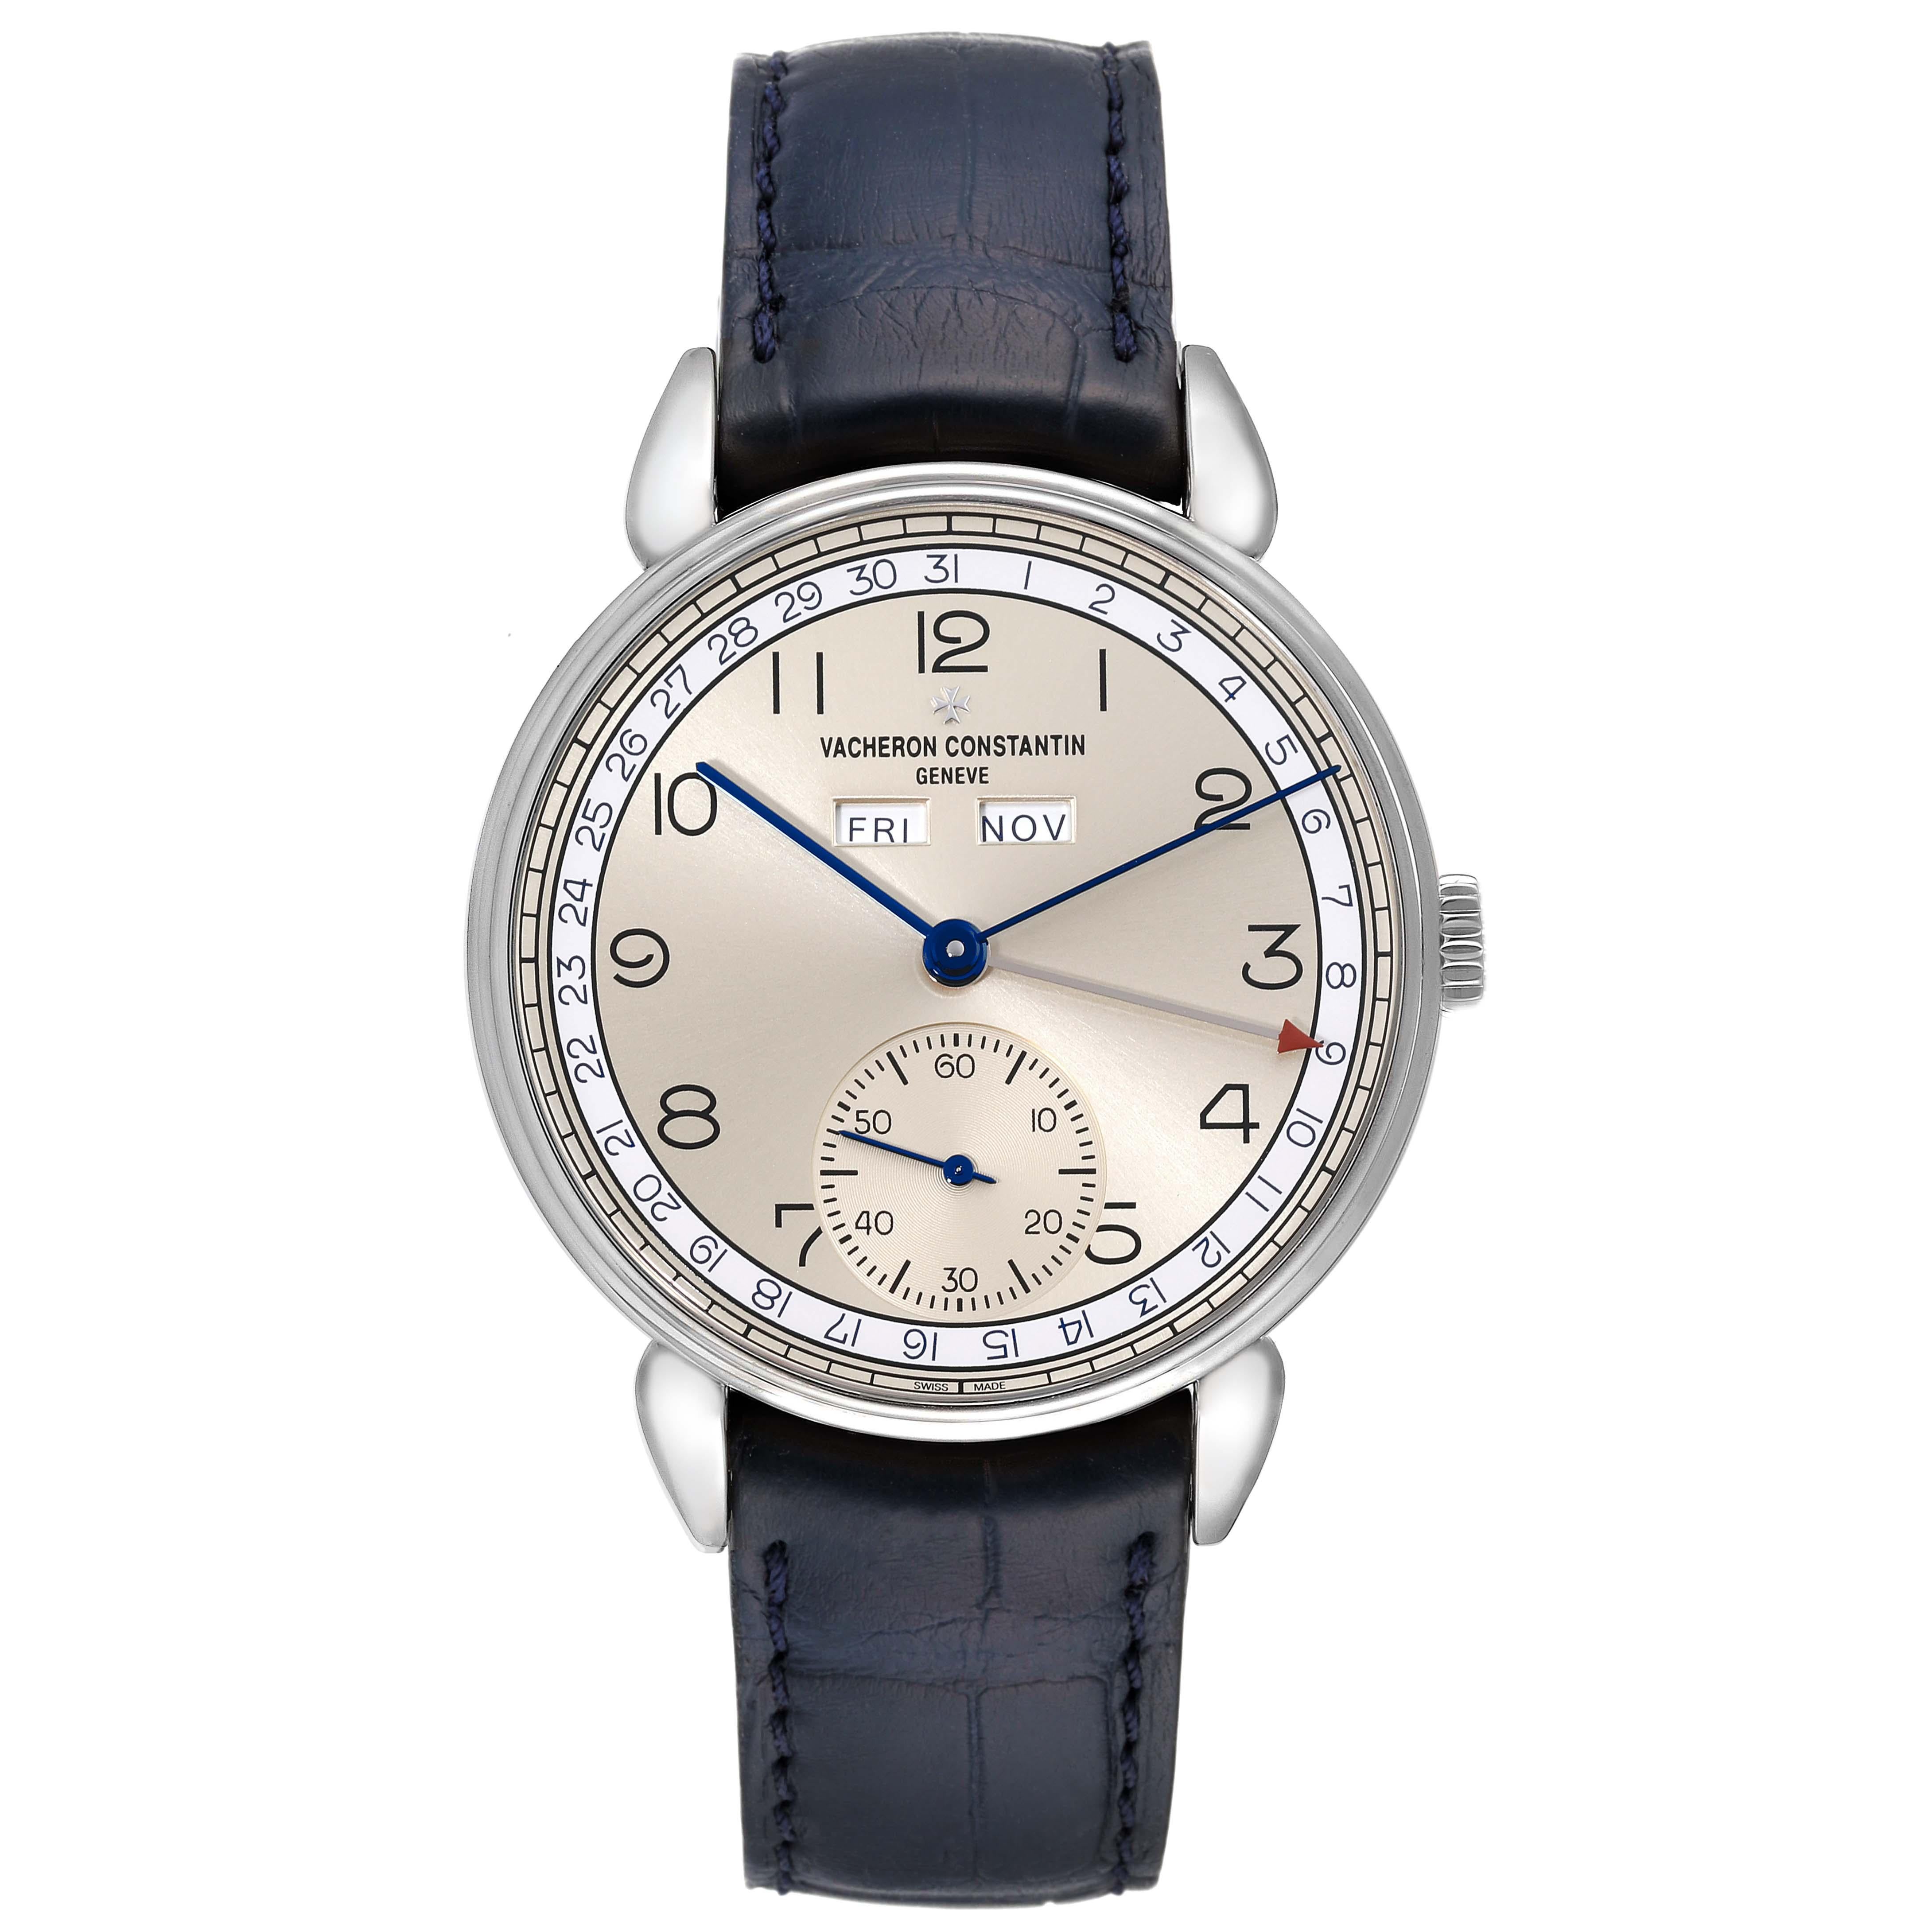 Vacheron Constantin Historique Triple Calendrier 1942 Mens Watch 3110V Box Card. Manual winding movement. Stainless steel case 40 mm in diameter.  Thickness 10.5 mm. Exhibition transparent sapphire crystal caseback. Stainless steel smooth bezel.